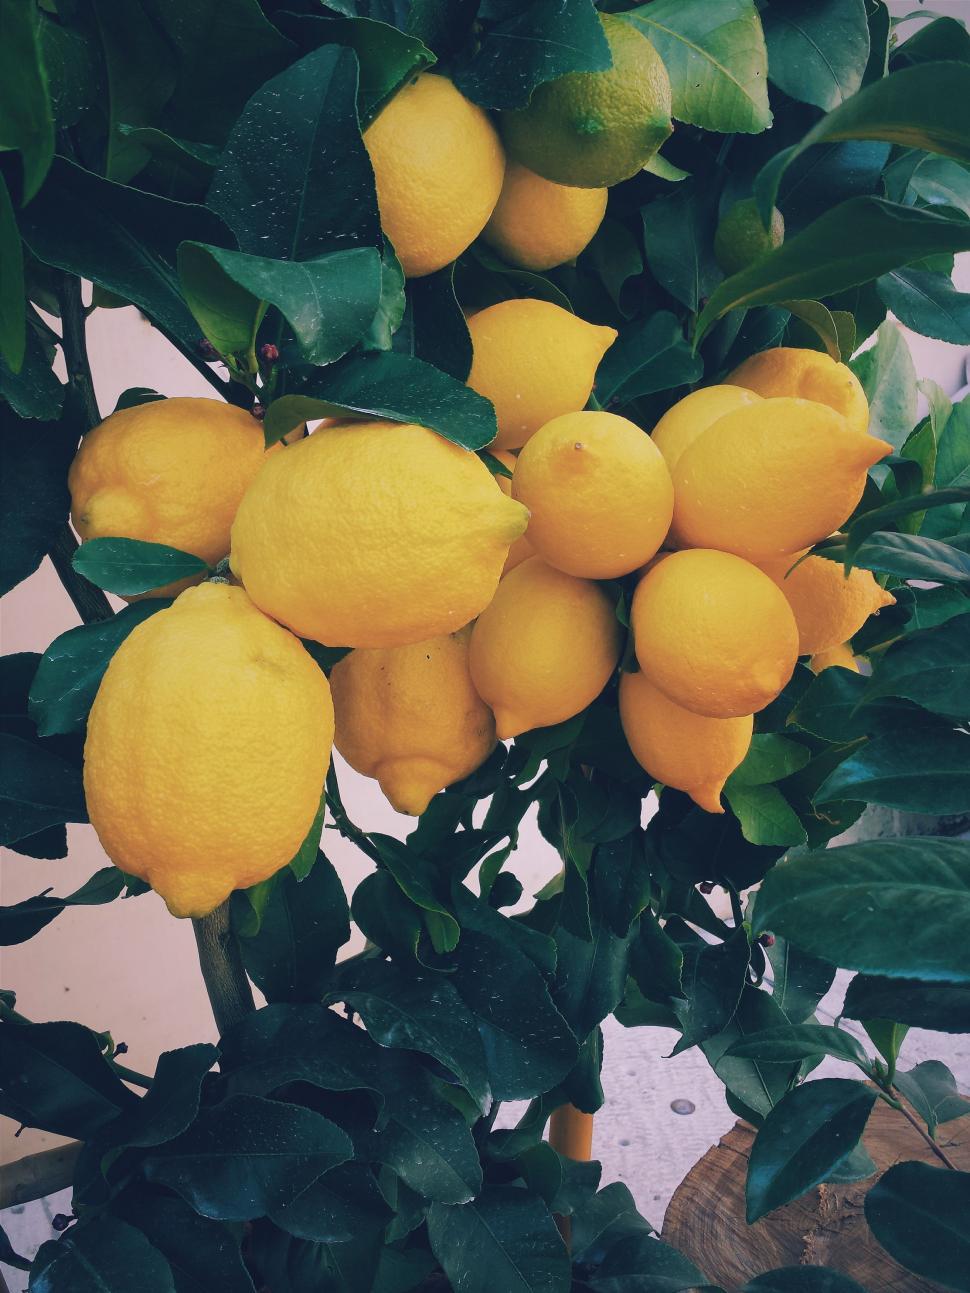 Free Image of Lemons Hanging From a Tree 